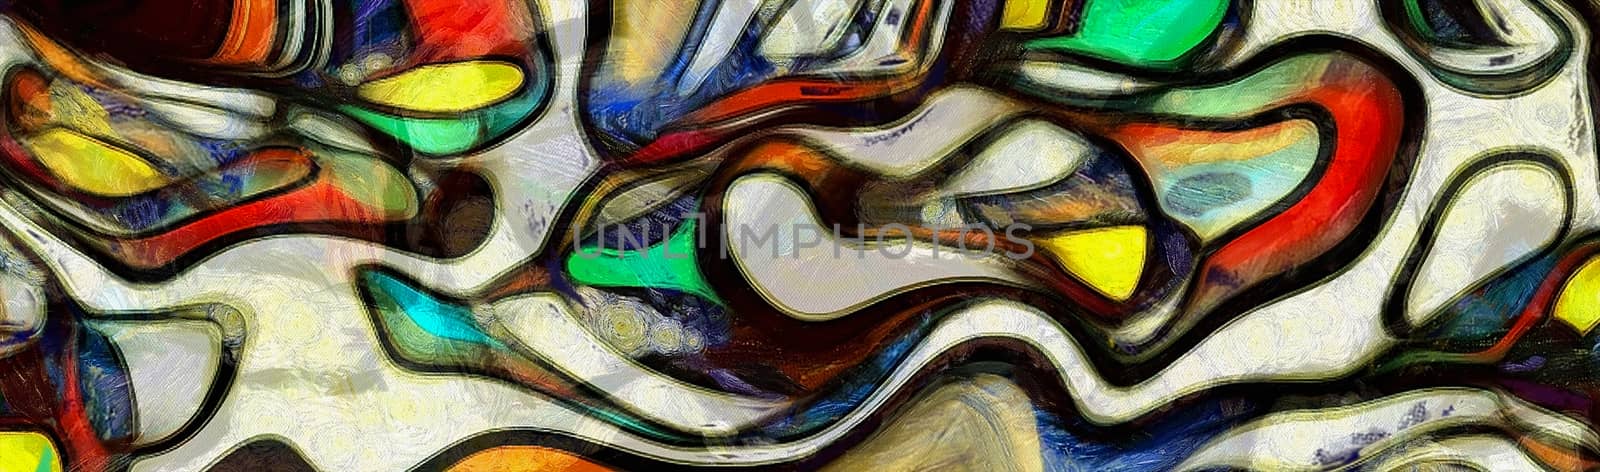 Swirling Shapes, Colors and Lines. 3D rendering